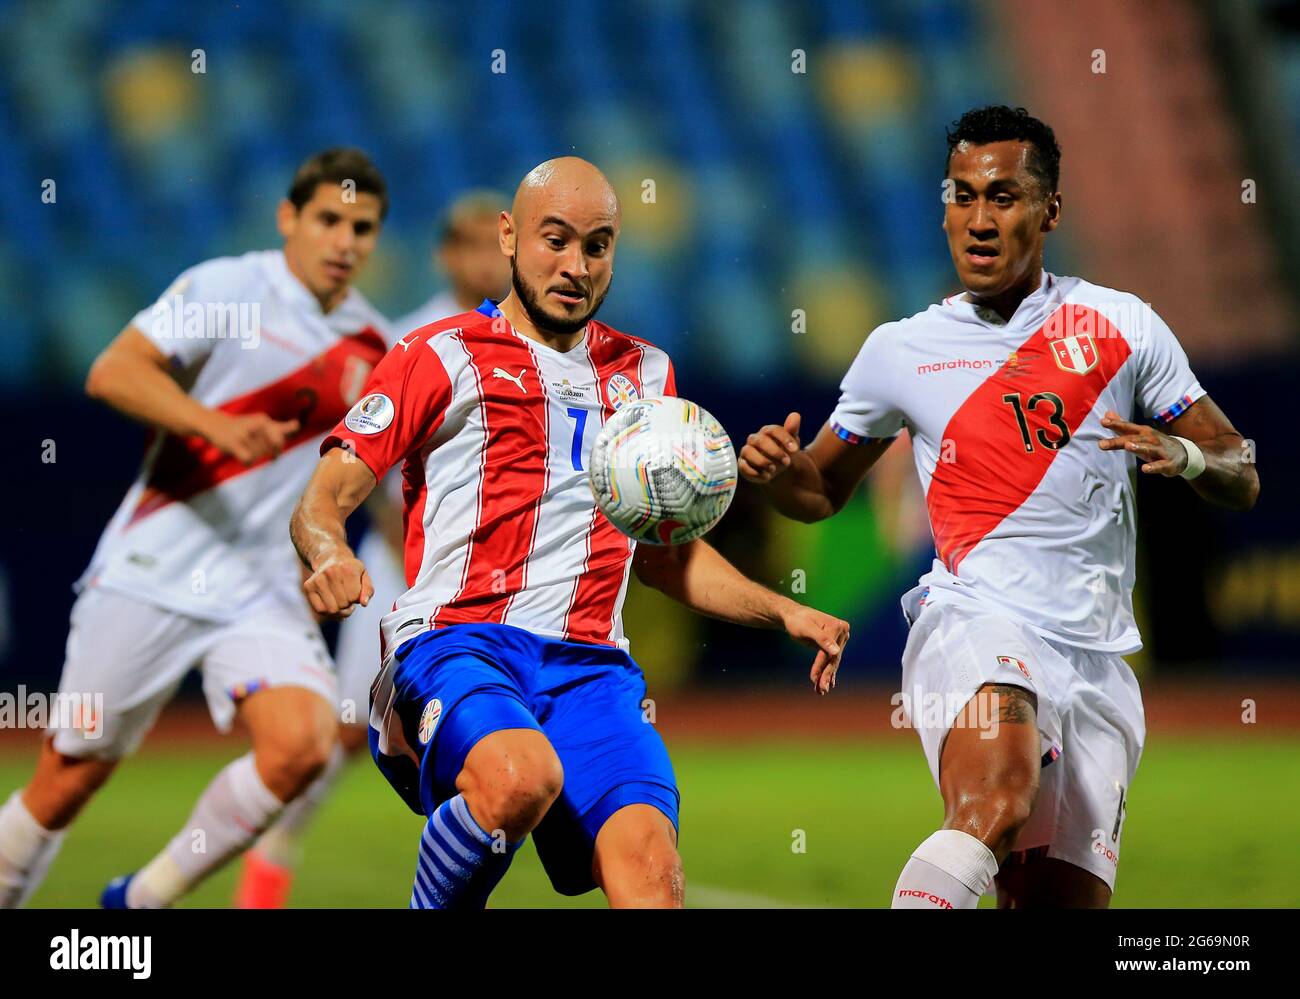 GOIANIA, BRAZIL - JULY 02: Carlos Gonzalez of Paraguay competes for the ball with Renato Tapia of Peru ,during the Quarterfinal match between Peru and Paraguay as part of Conmebol Copa America Brazil 2021 at Estadio Olimpico on July 2, 2021 in Goiania, Brazil. (MB Media) Stock Photo